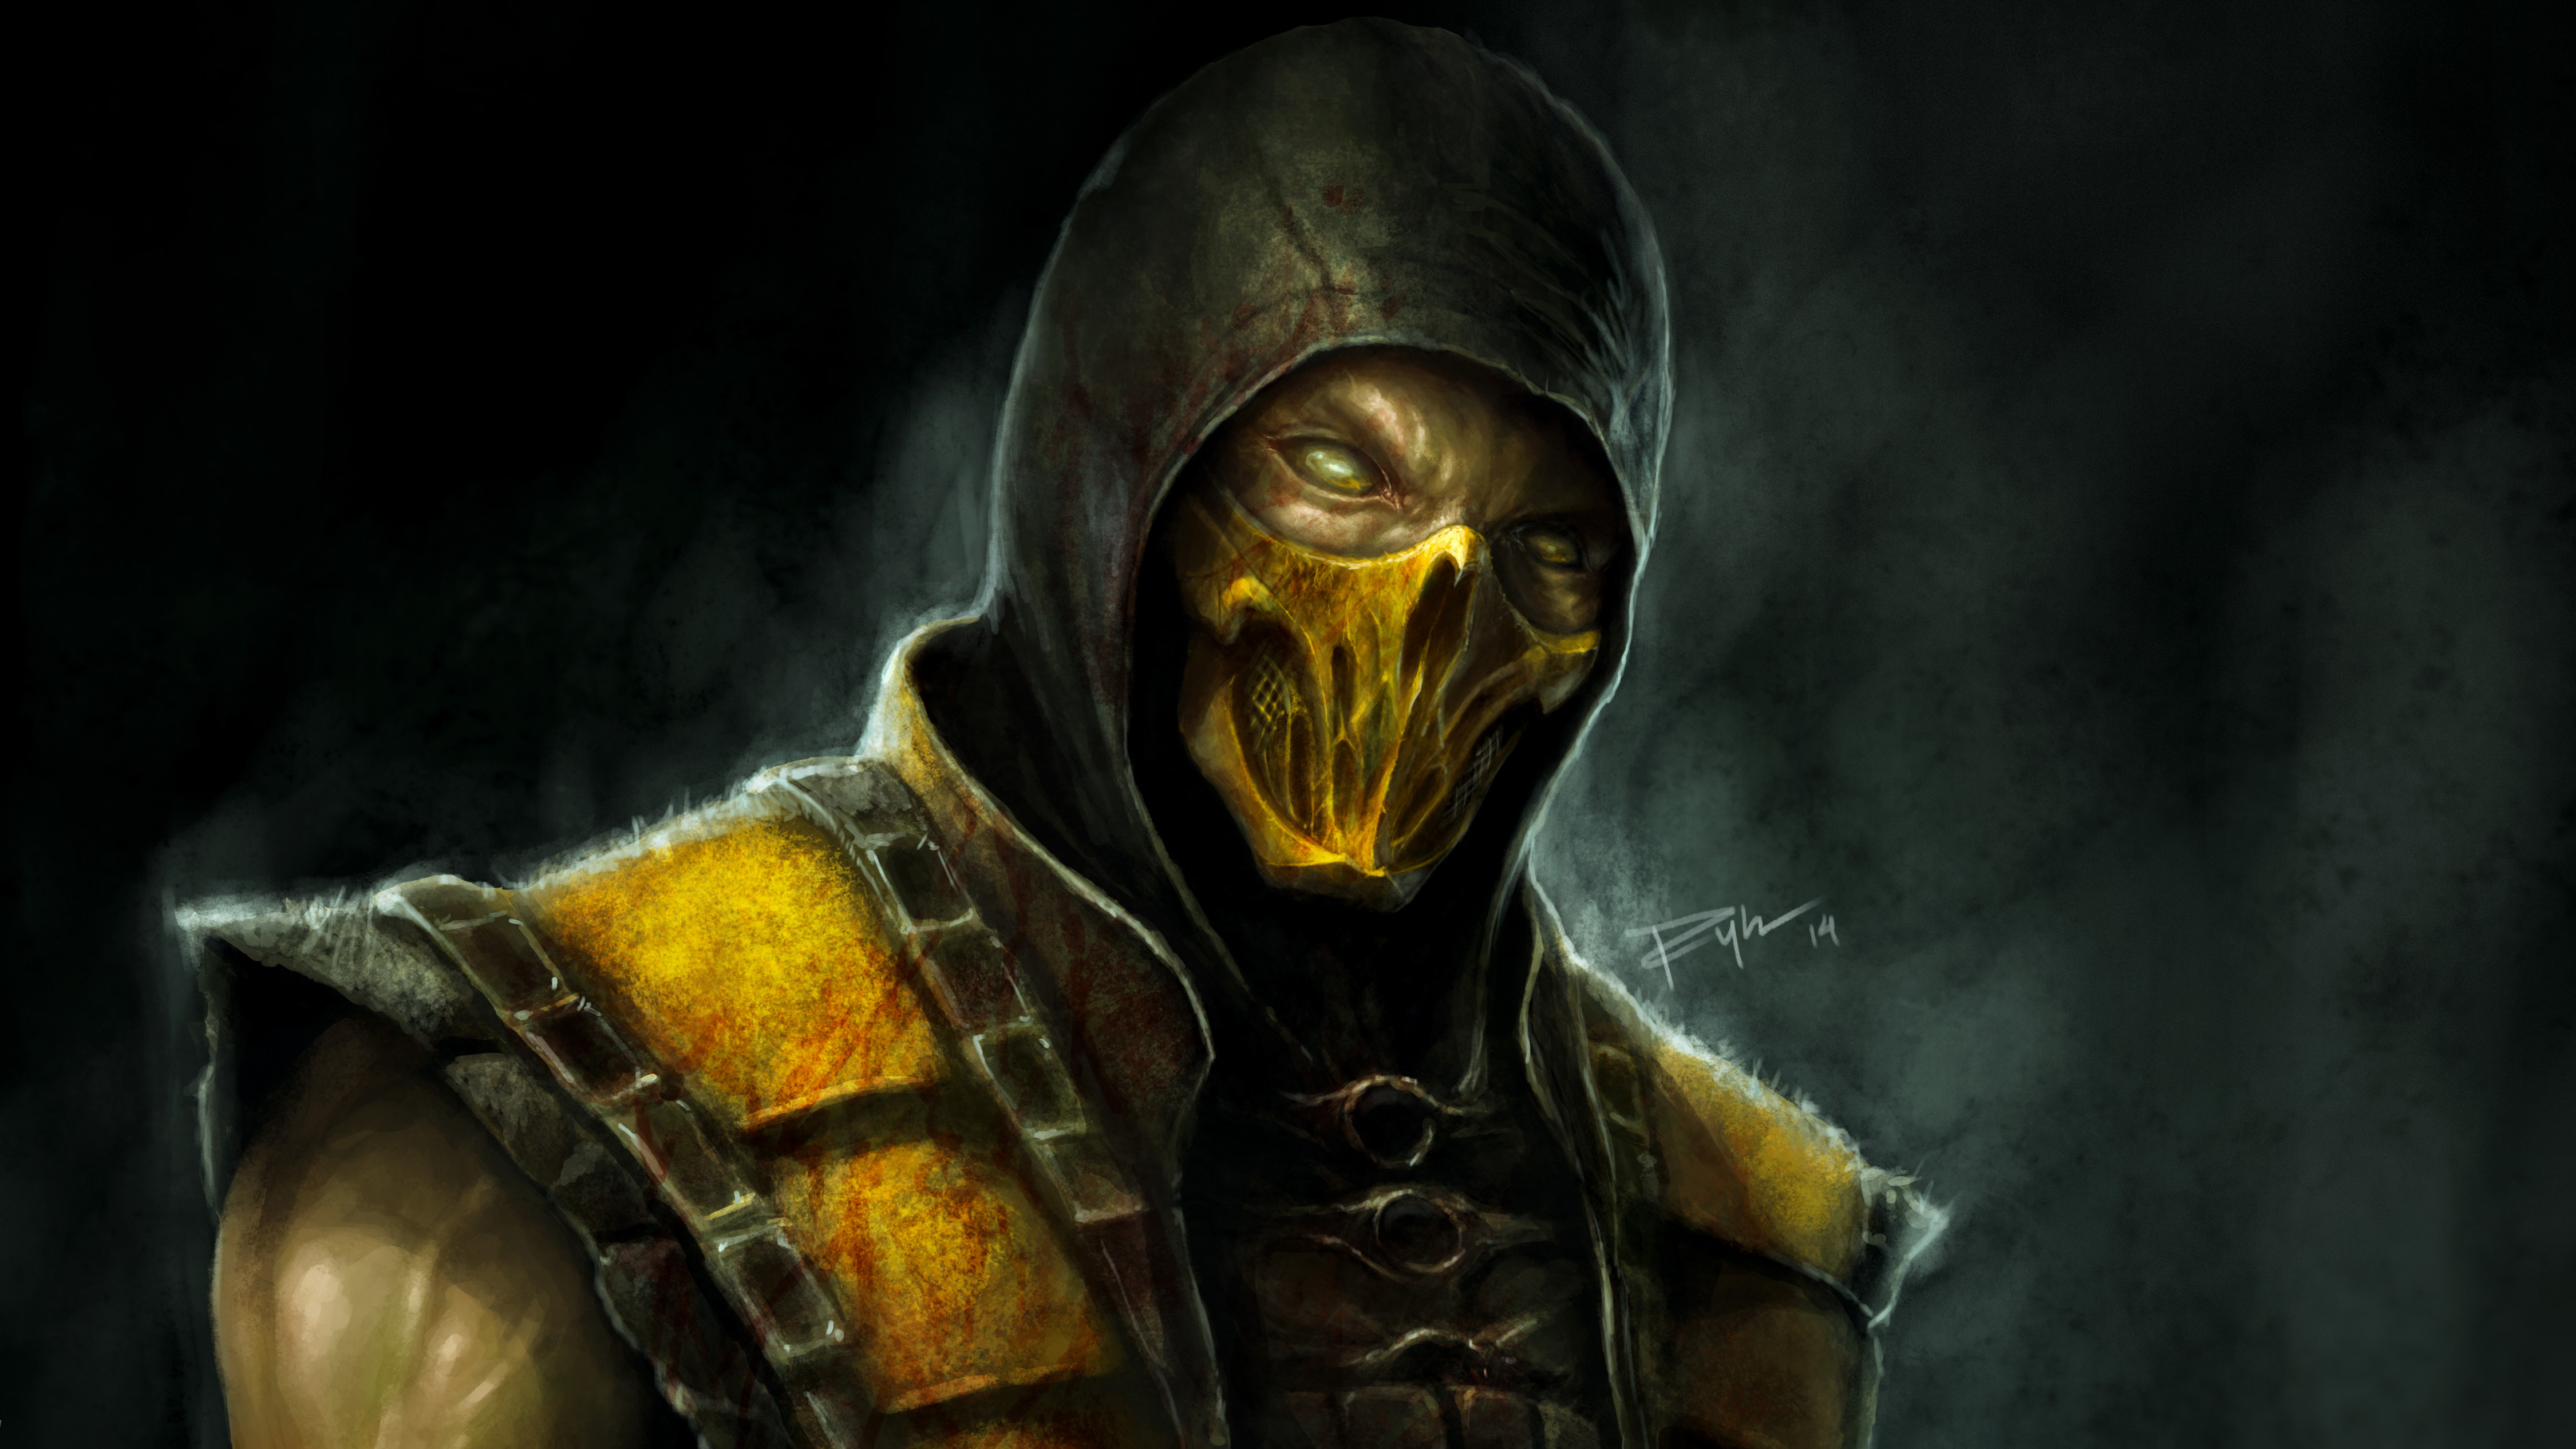 Mortal Kombat Hd Wallpapers For Android Mobile Full Screen